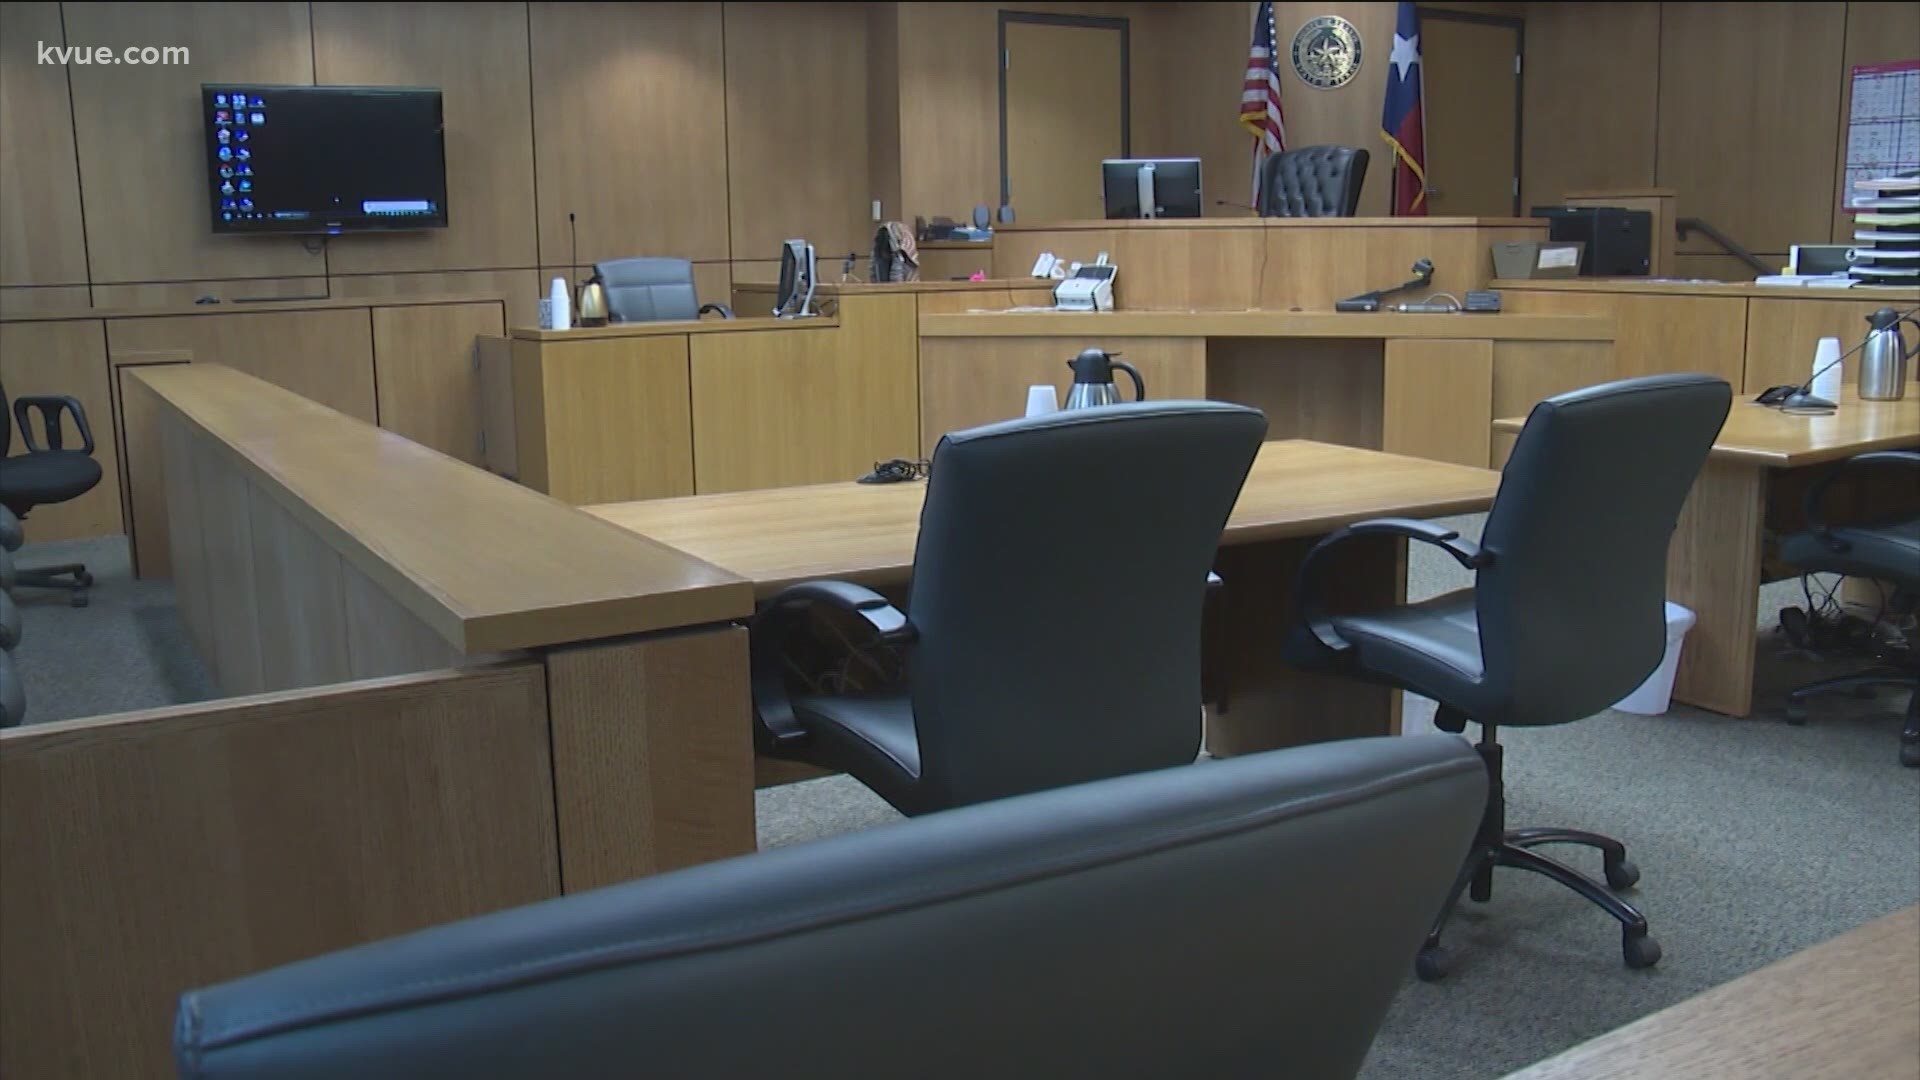 The Travis County District Attorney's Office is looking for a prosecutor to lead its civil rights unit.
But an email about that job opening is causing controversy.